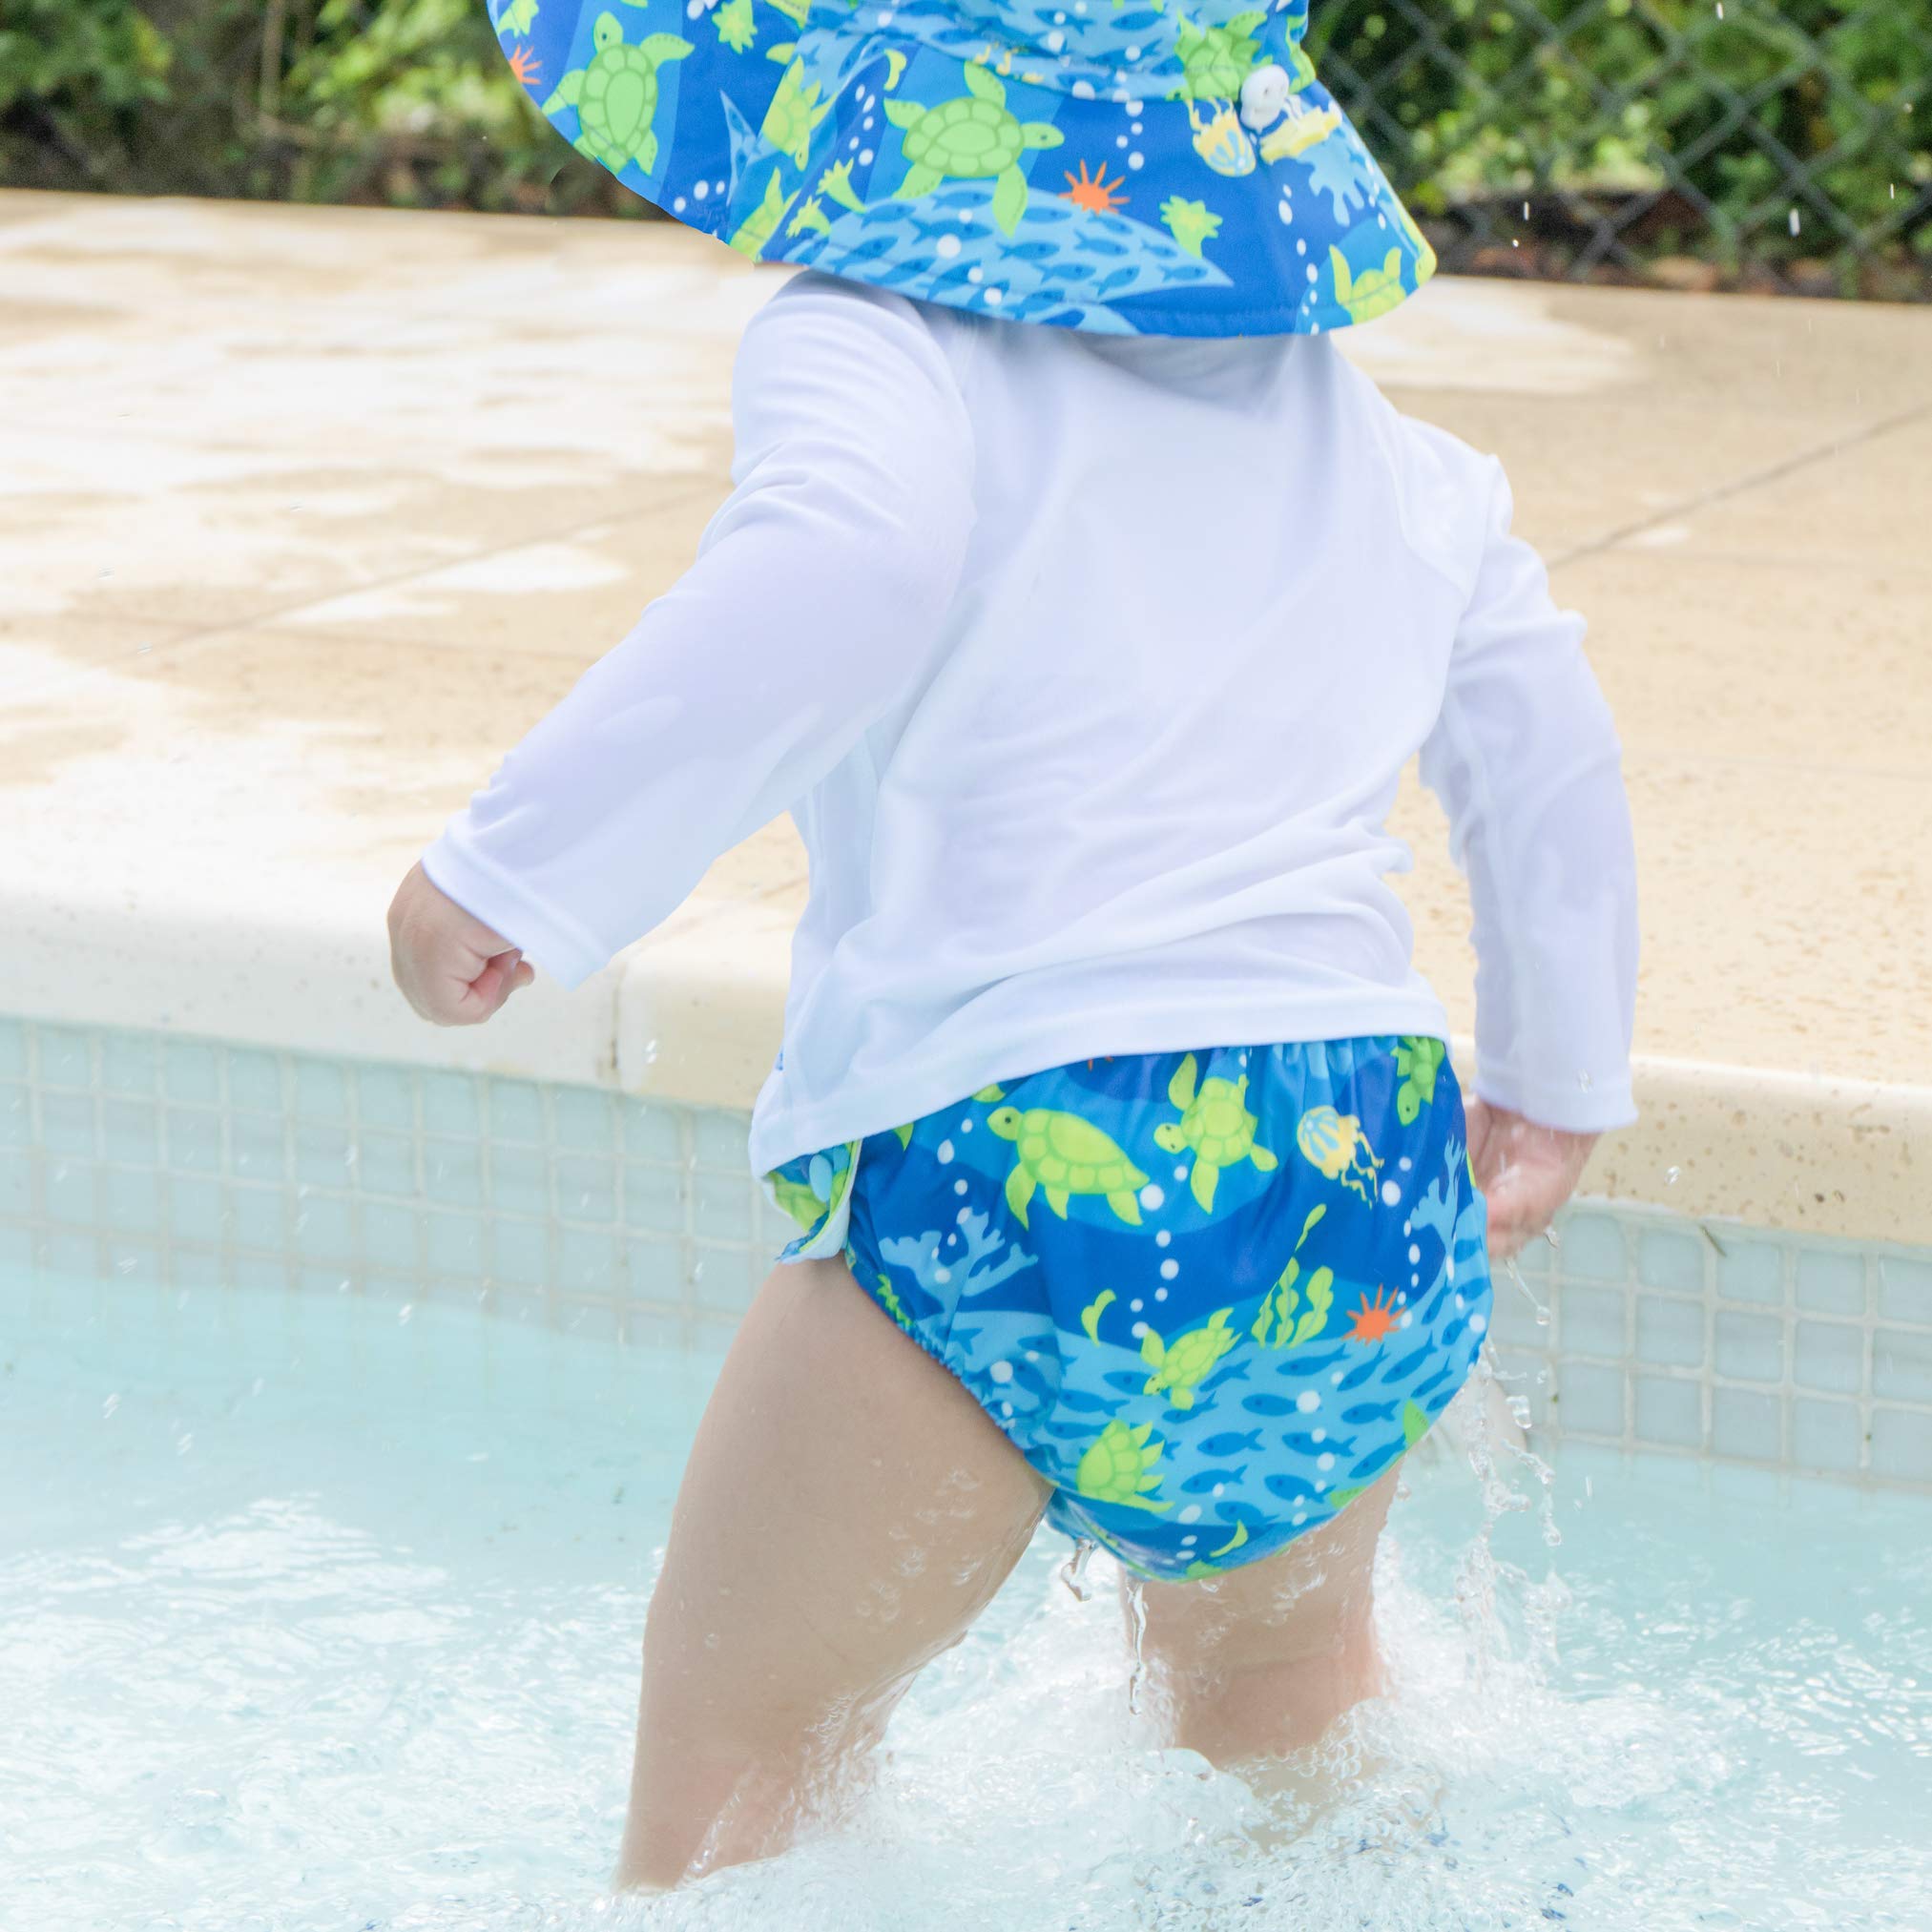 i play. Boys Snap Reusable Absorbent Swimsuit Diaper